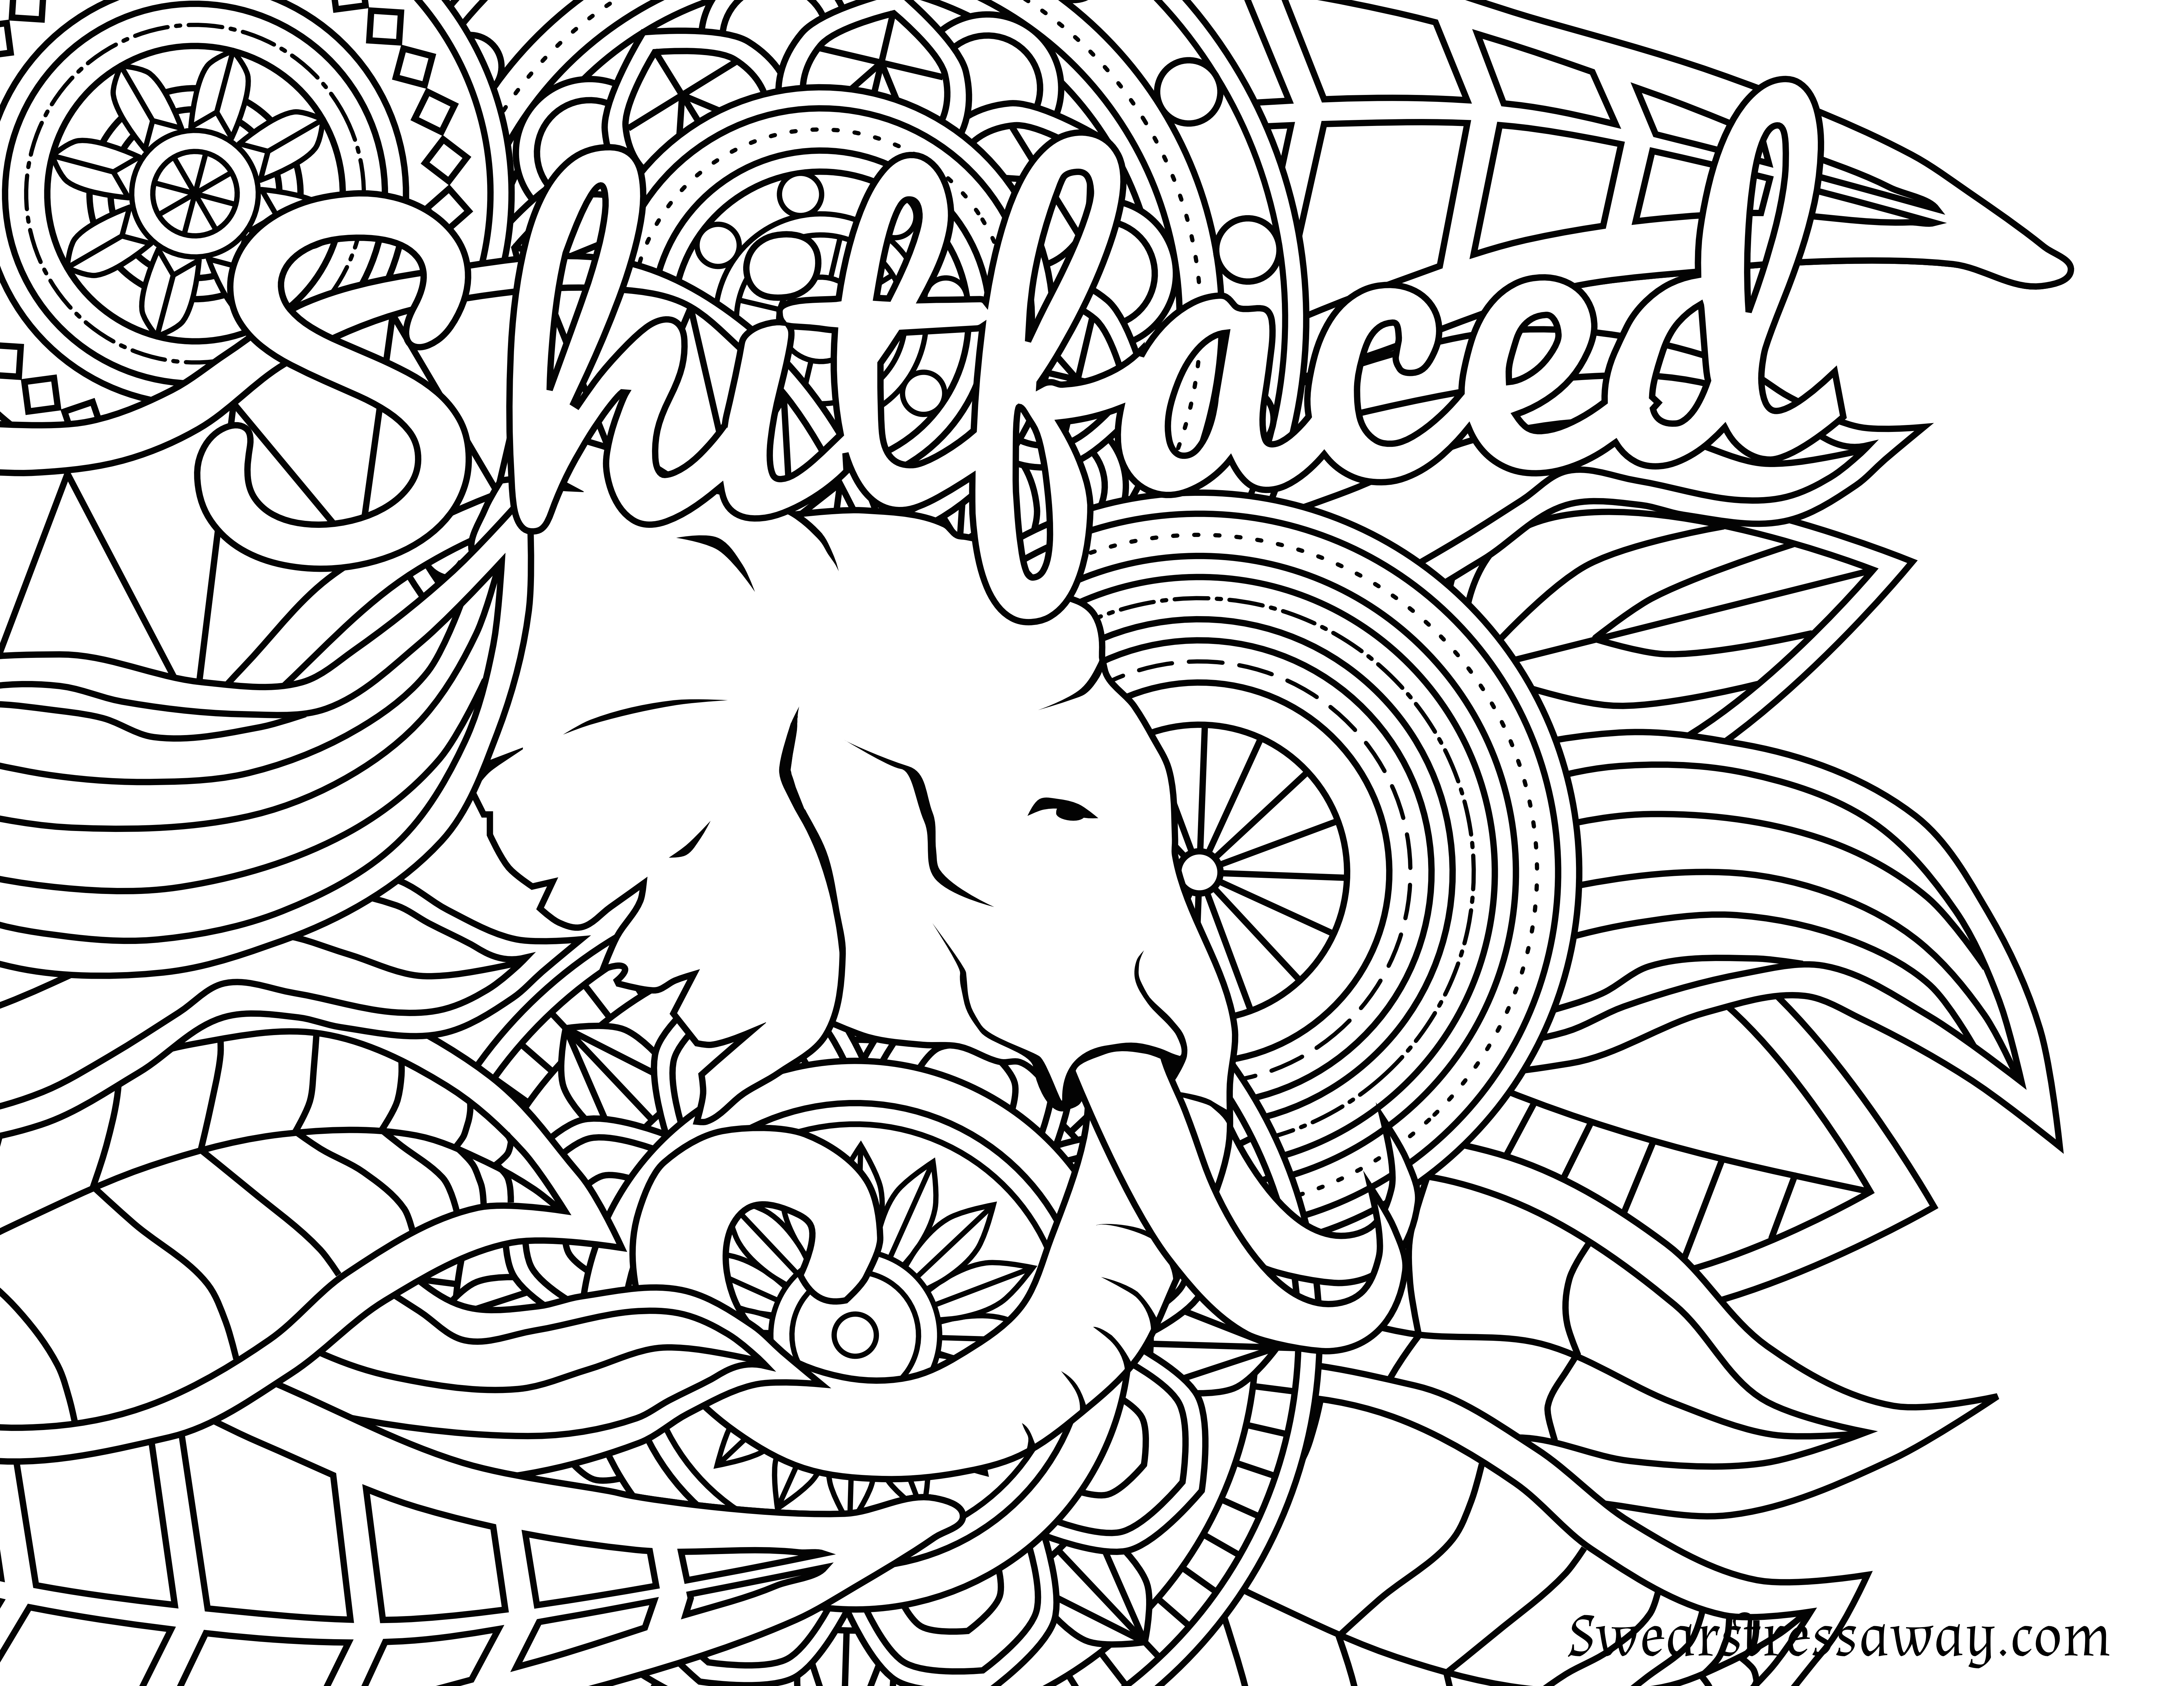 Free Printable Coloring Page - Shitfaced - Swear Word Coloring Page - Free Printable Swear Word Coloring Pages